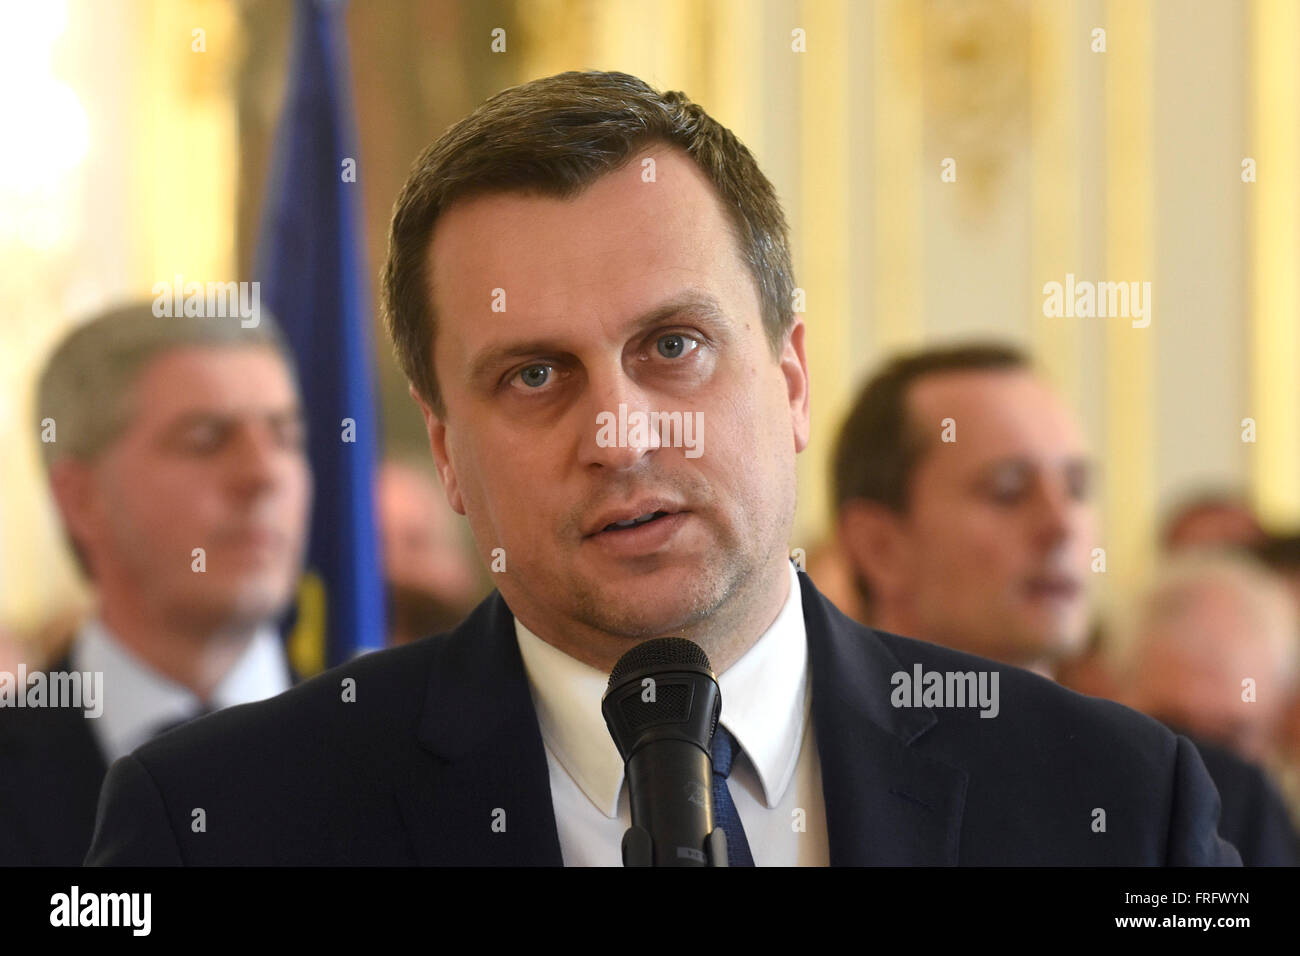 Bratislava, Slovakia. 22nd Mar, 2016. The chairmen of four Slovak political parties Radoslav Prochazka, Bela Bugar, Robert Fico, Andrej Danko (pictured) signed a coalition agreement today following a recent general election. Prime Minister Robert Fico's Smer-Social Democracy (Smer-SD) will have the strongest representation in the government in Bratislava, Slovakia, March 22, 2016. © Martin Mikula/CTK Photo/Alamy Live News Stock Photo